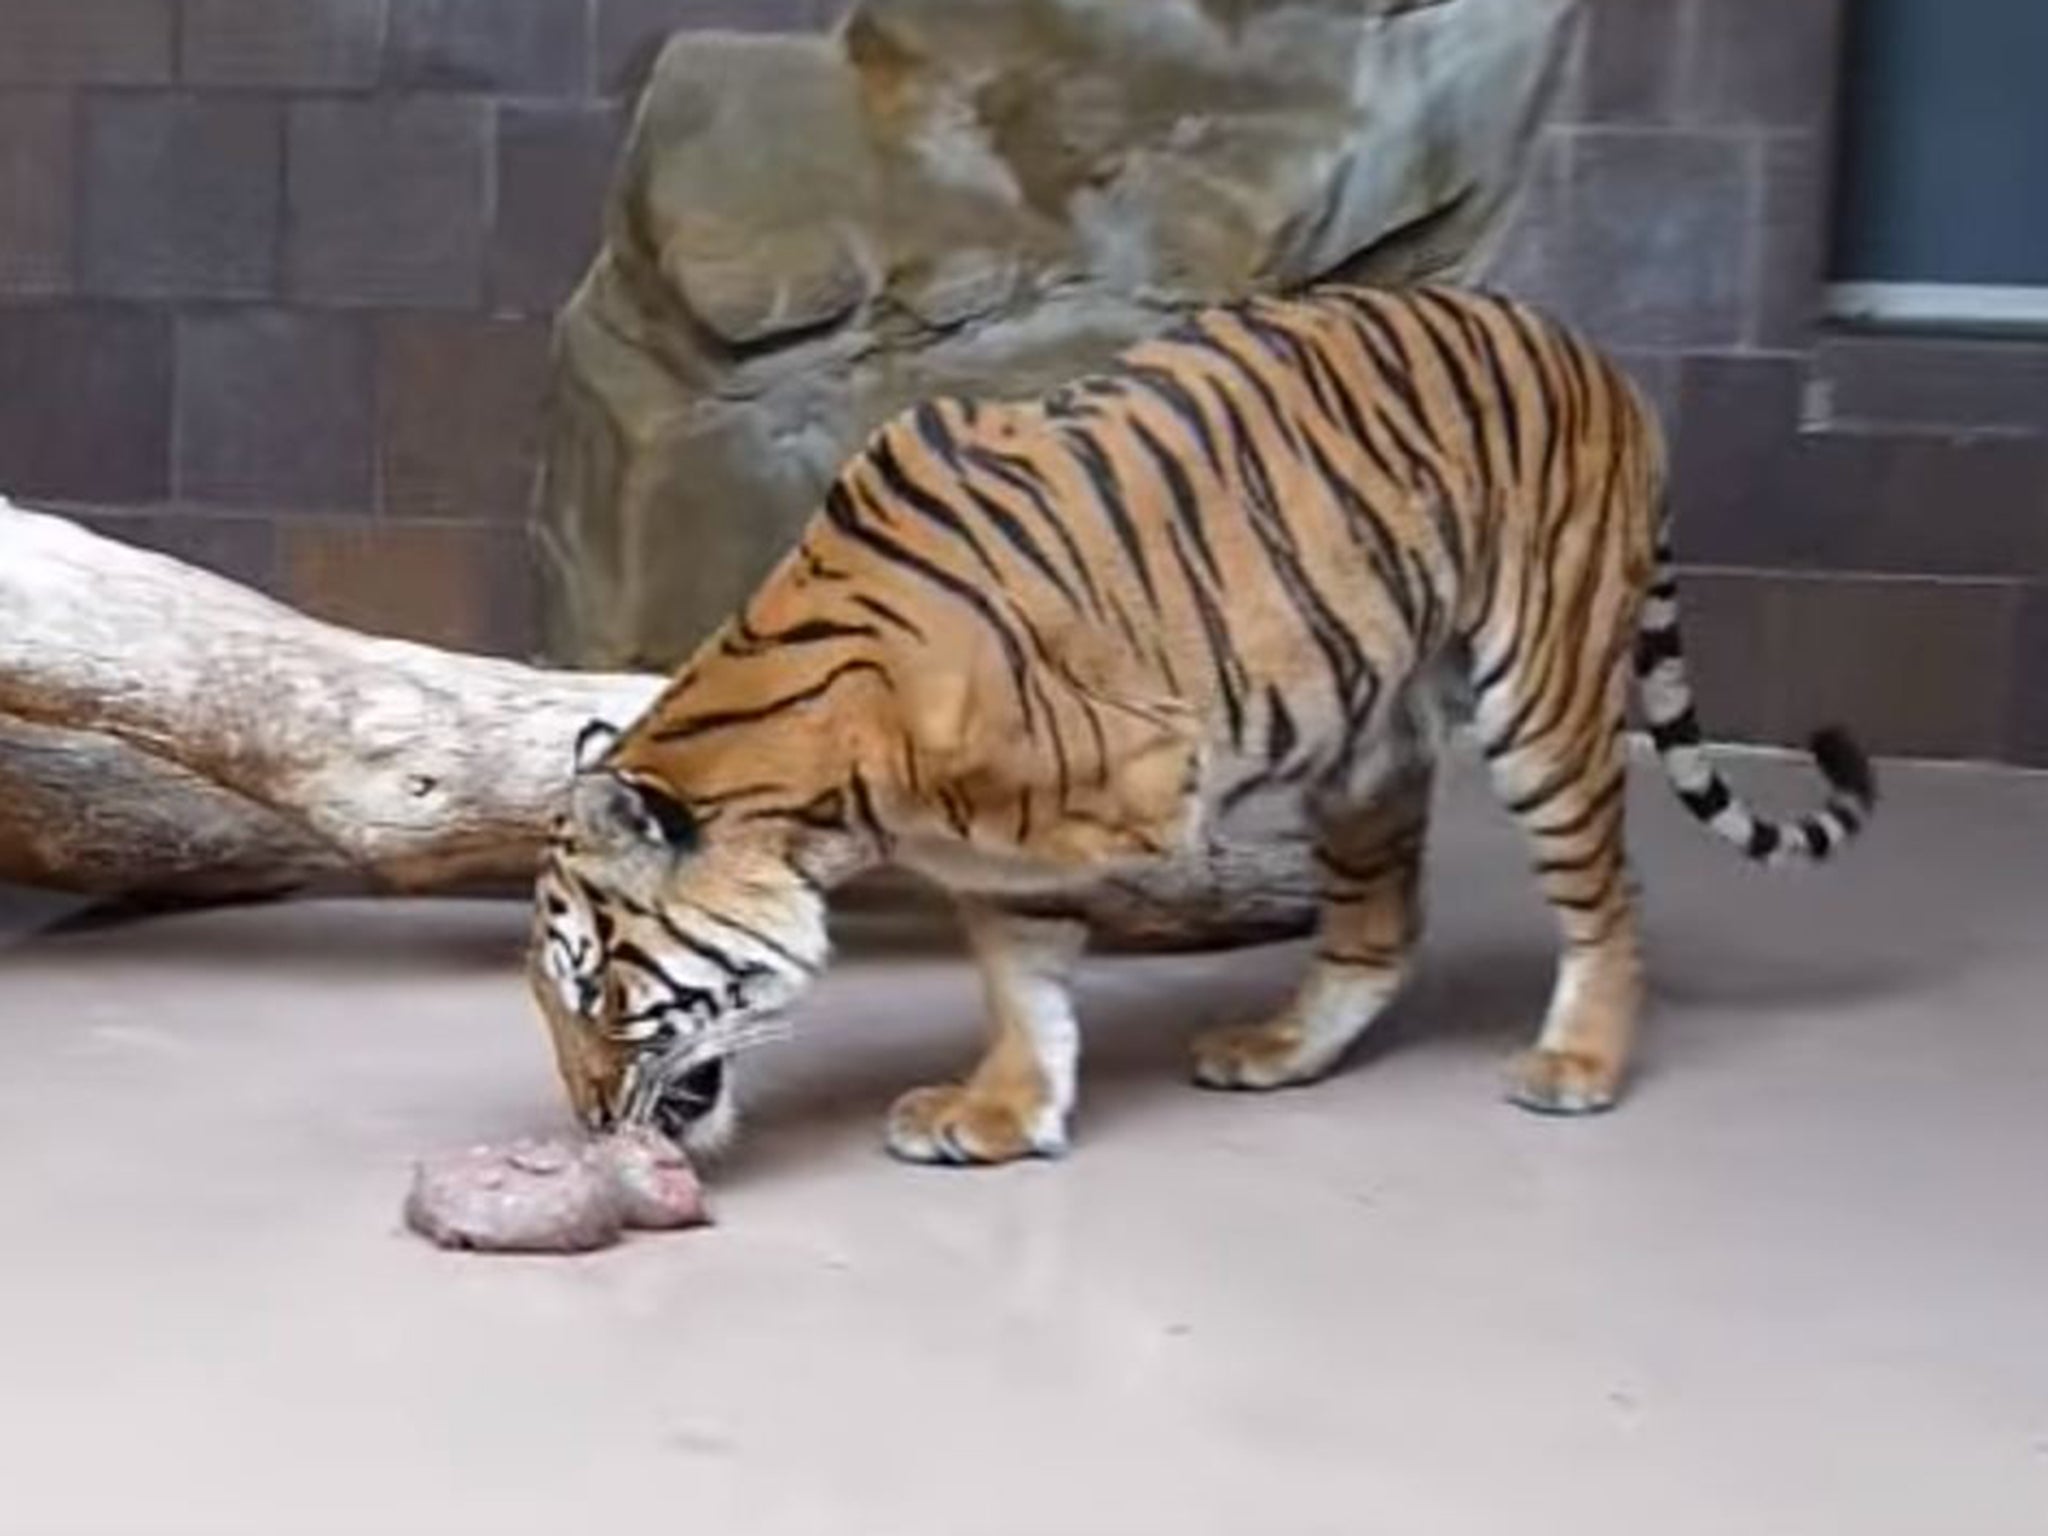 Mai the Malayan tiger was found with her front left leg ensnared in a poacher’s trap.